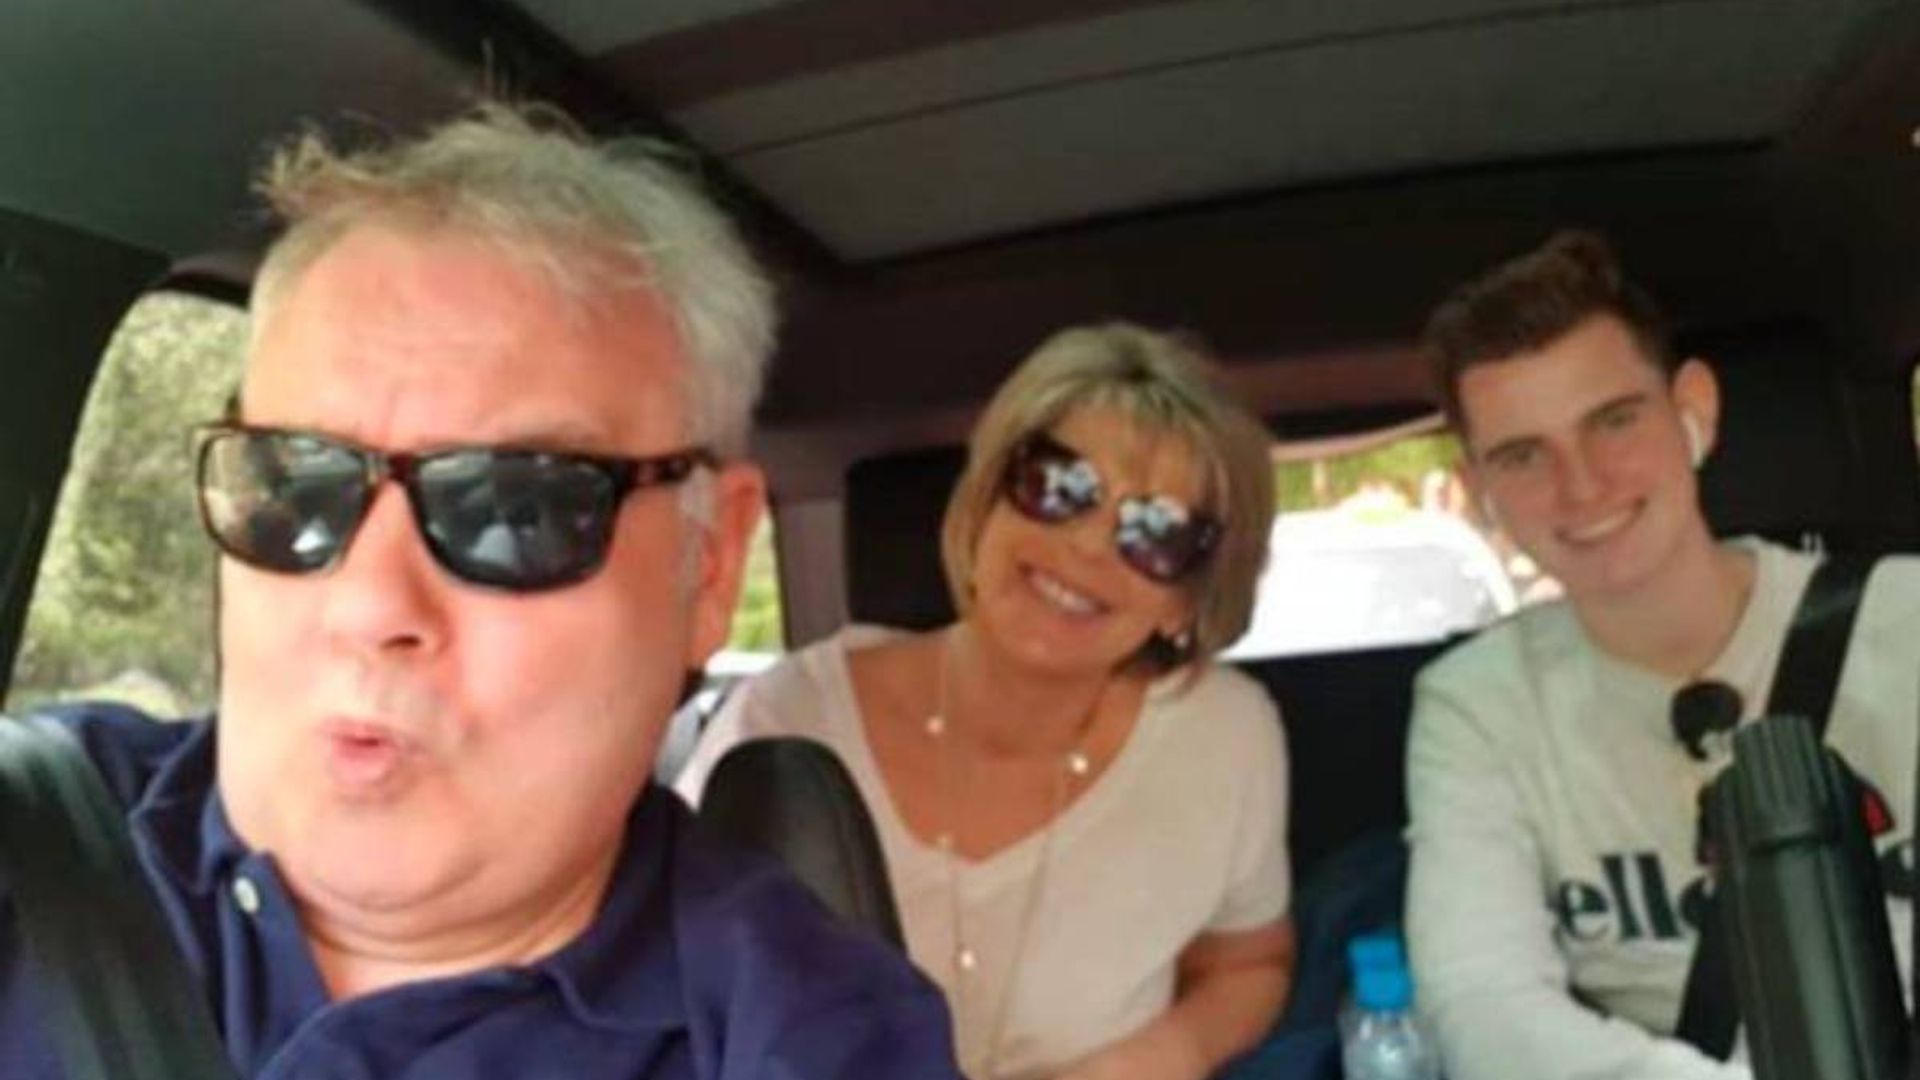 Ruth Langsford's sweet tradition with Eamonn Holmes and son Jack revealed